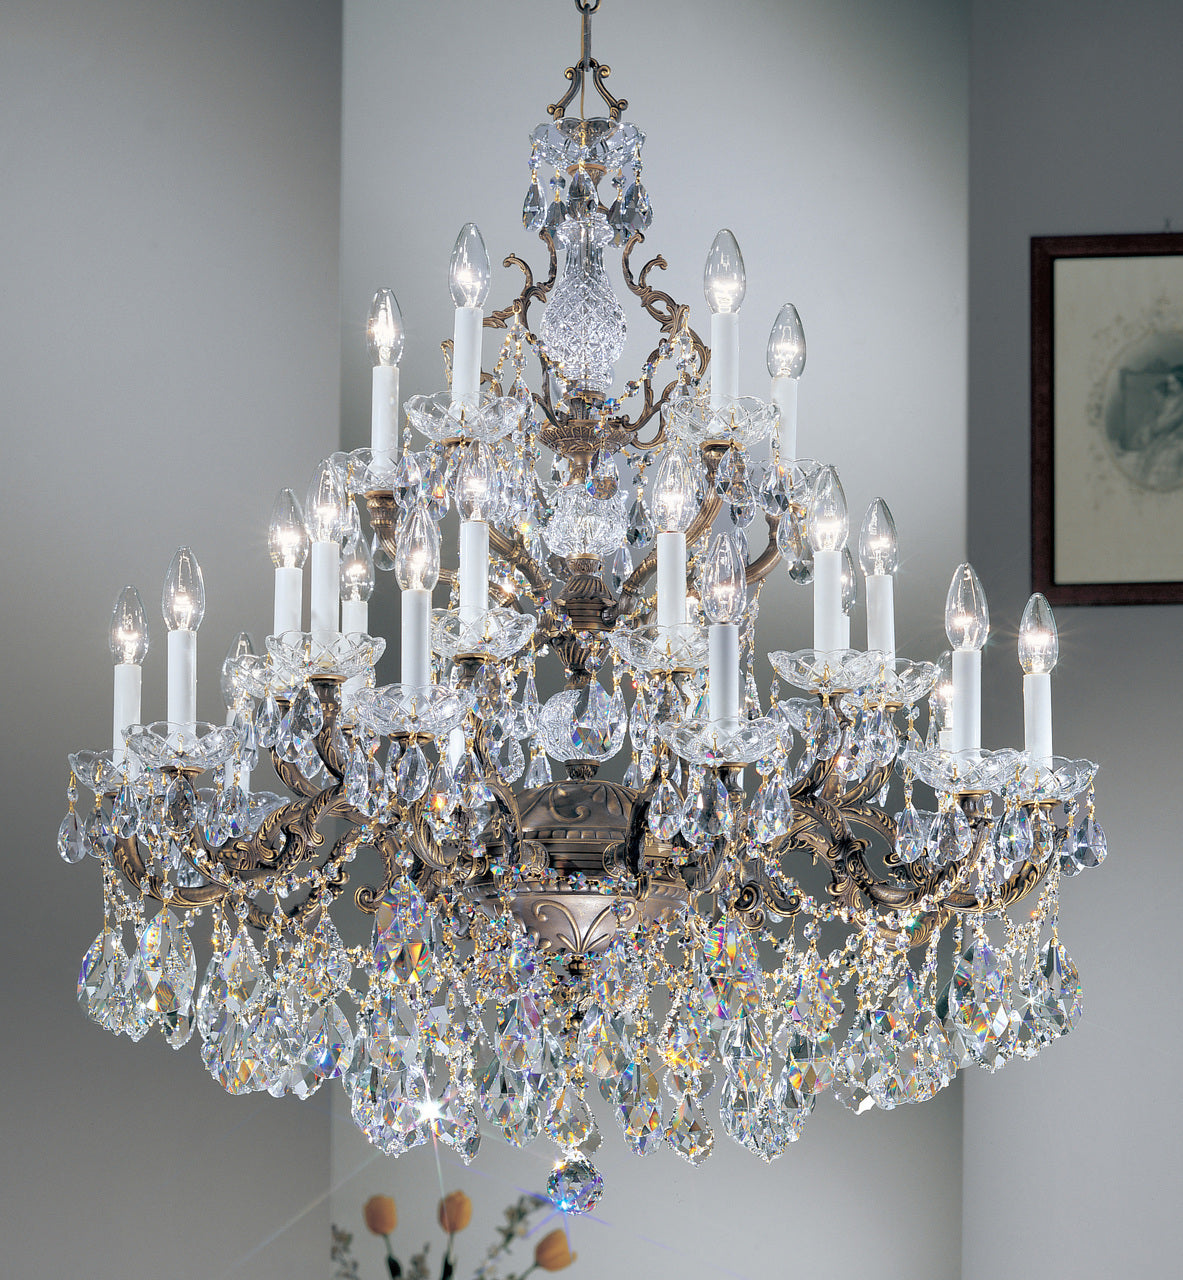 Classic Lighting 5545 RB PAM Madrid Imperial Crystal/Cast Brass Chandelier in Roman Bronze (Imported from Spain)